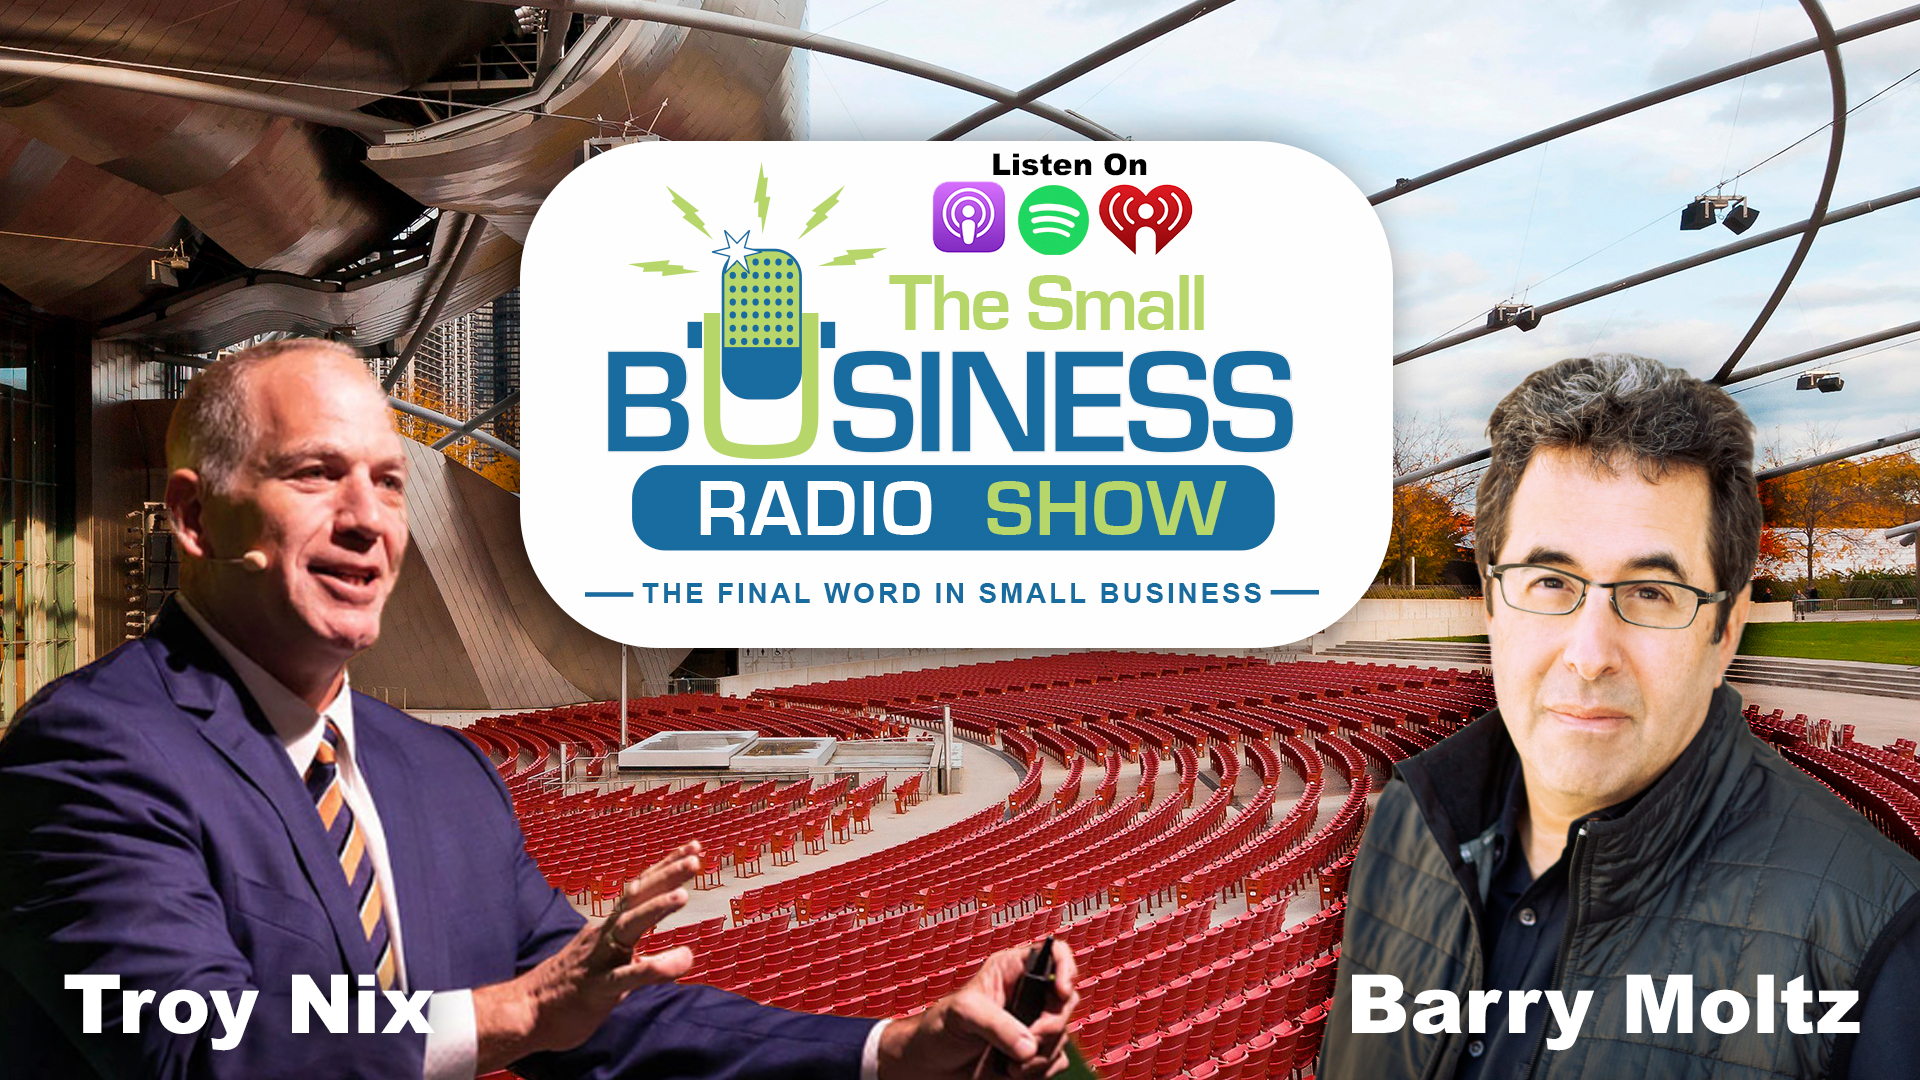 Troy Nix on The Small Business Radio Show